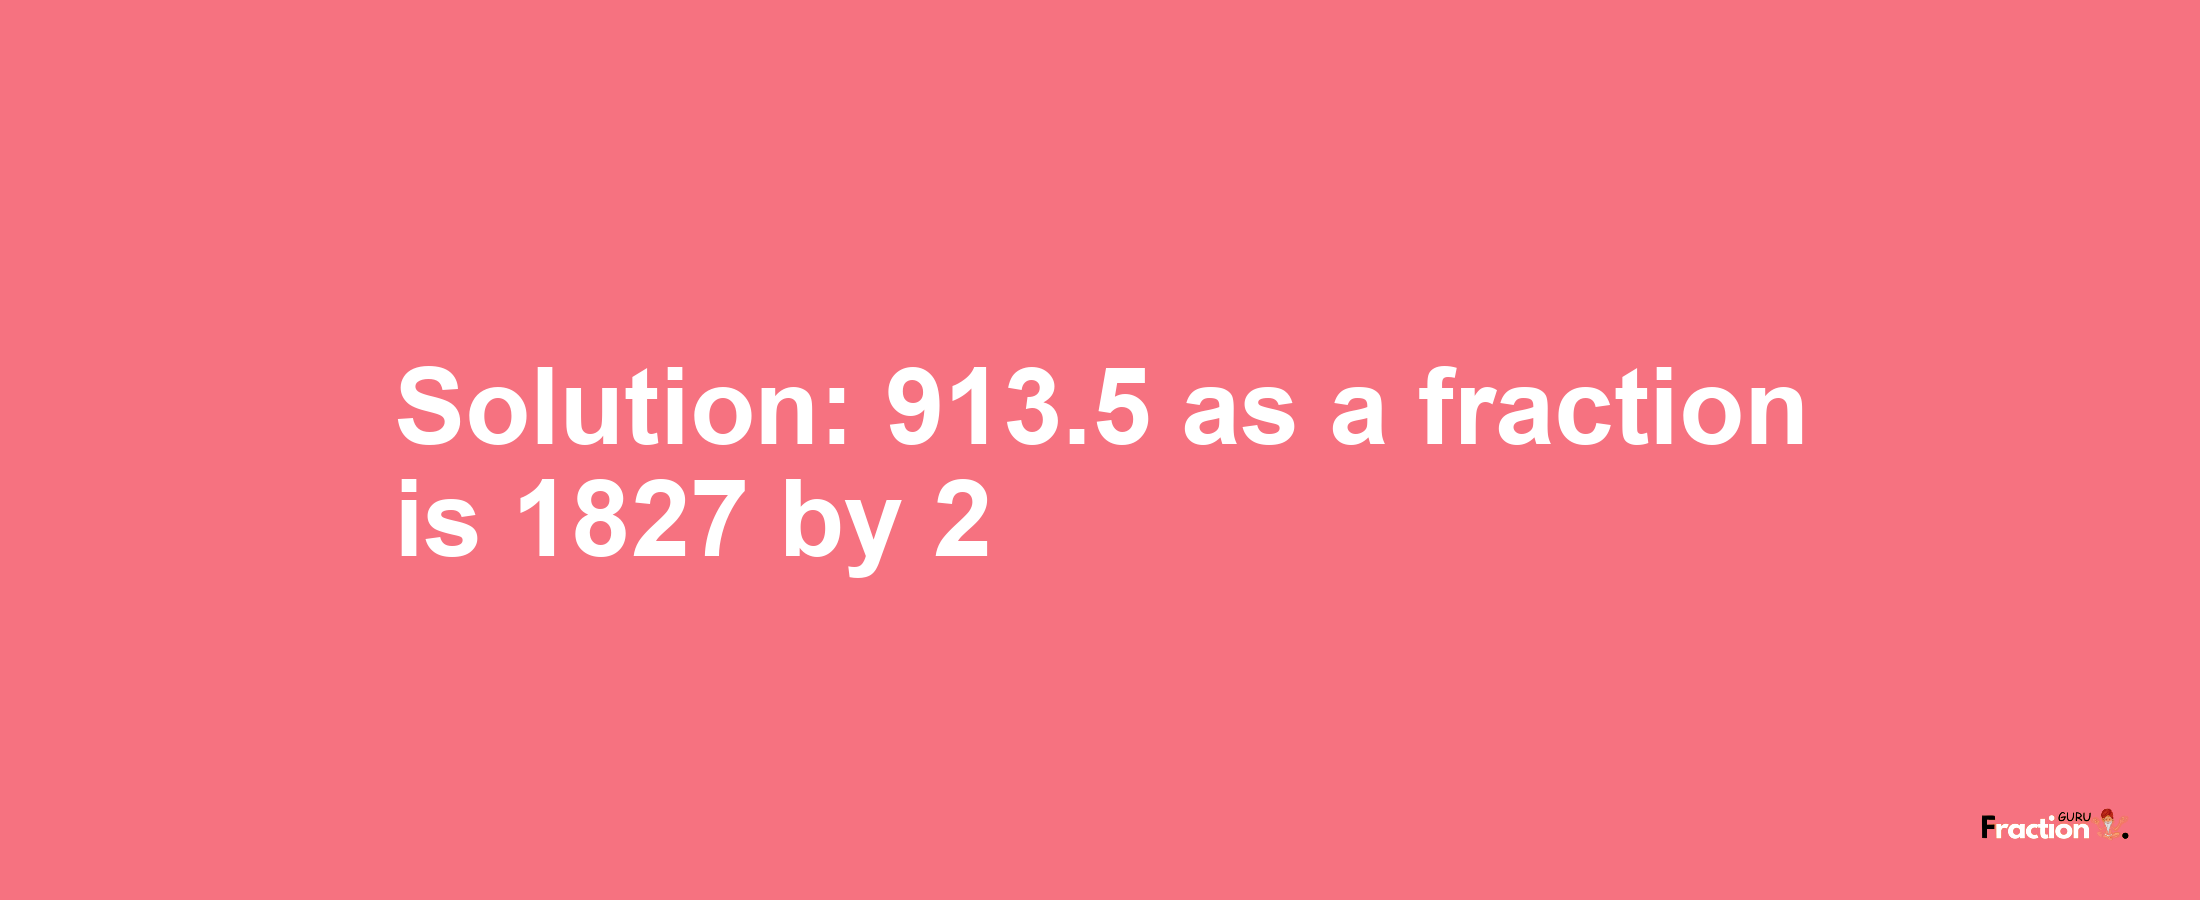 Solution:913.5 as a fraction is 1827/2